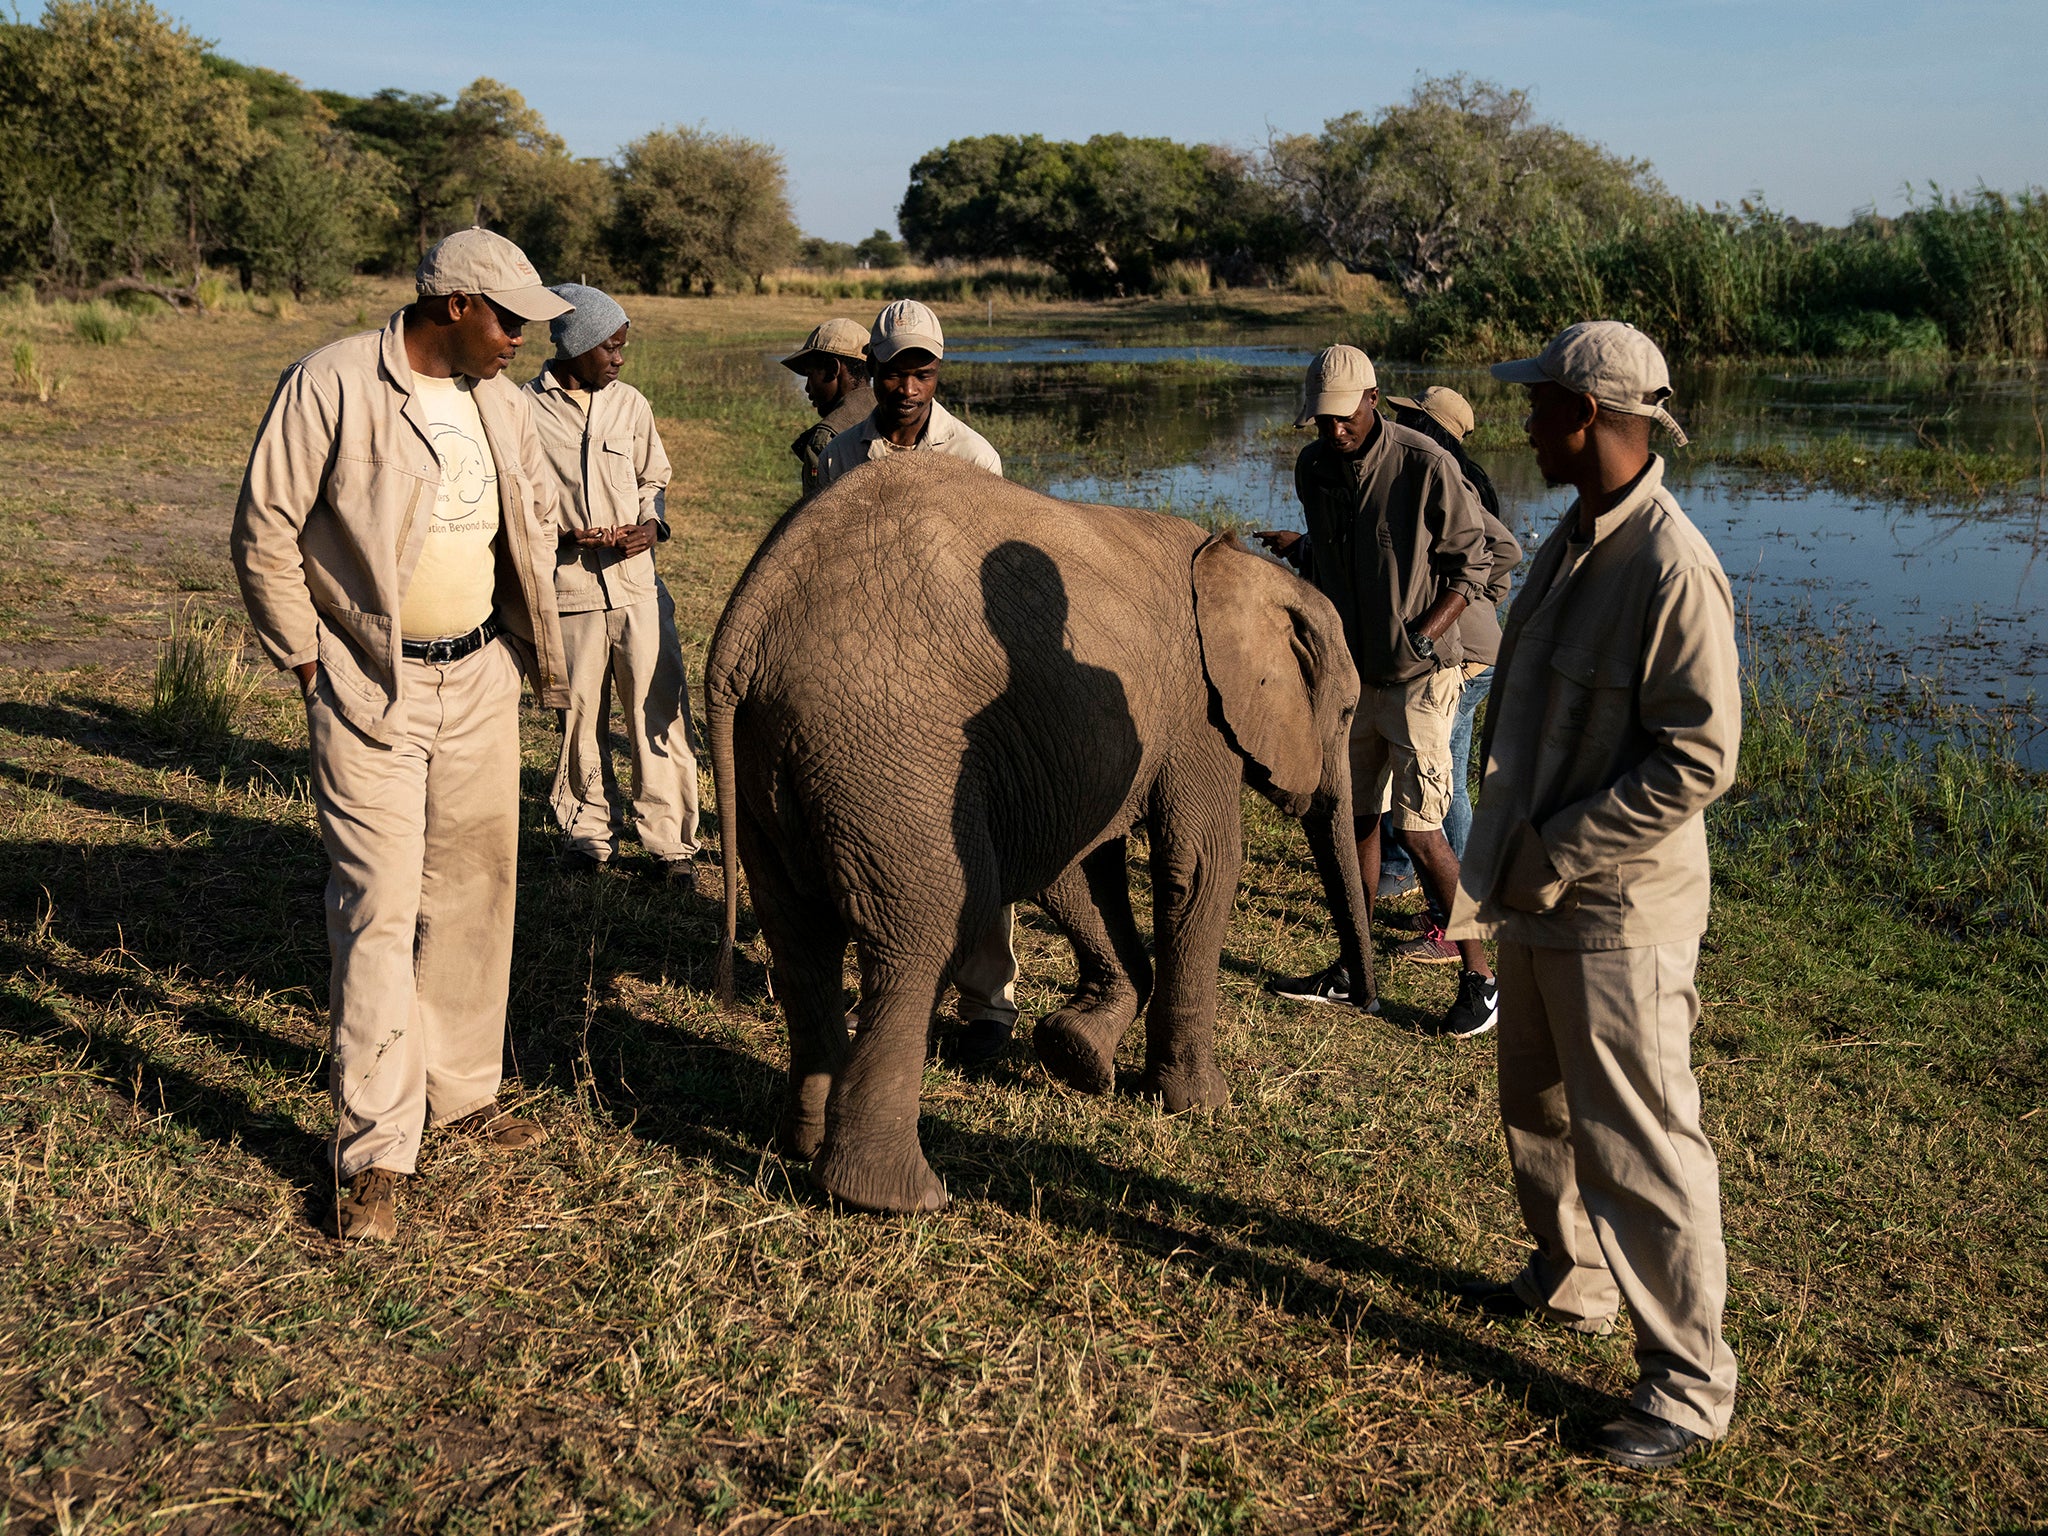 Tuli interacts with her caretakers as they change shifts in the elephant orphanage at Elephants Without Borders in Kasane, Botswana